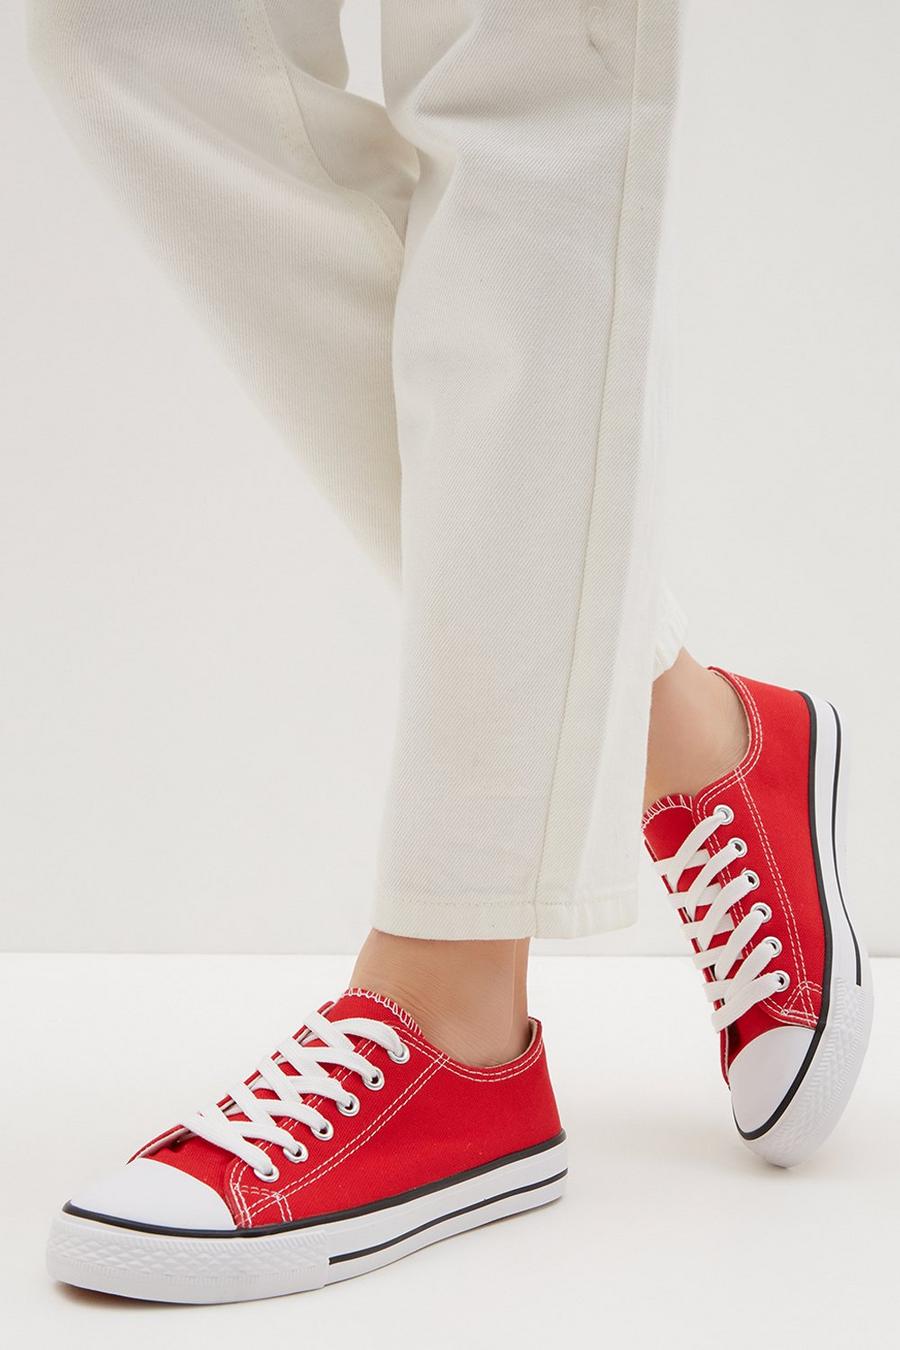 Wide Fit Theodora Canvas Lace Up Trainer